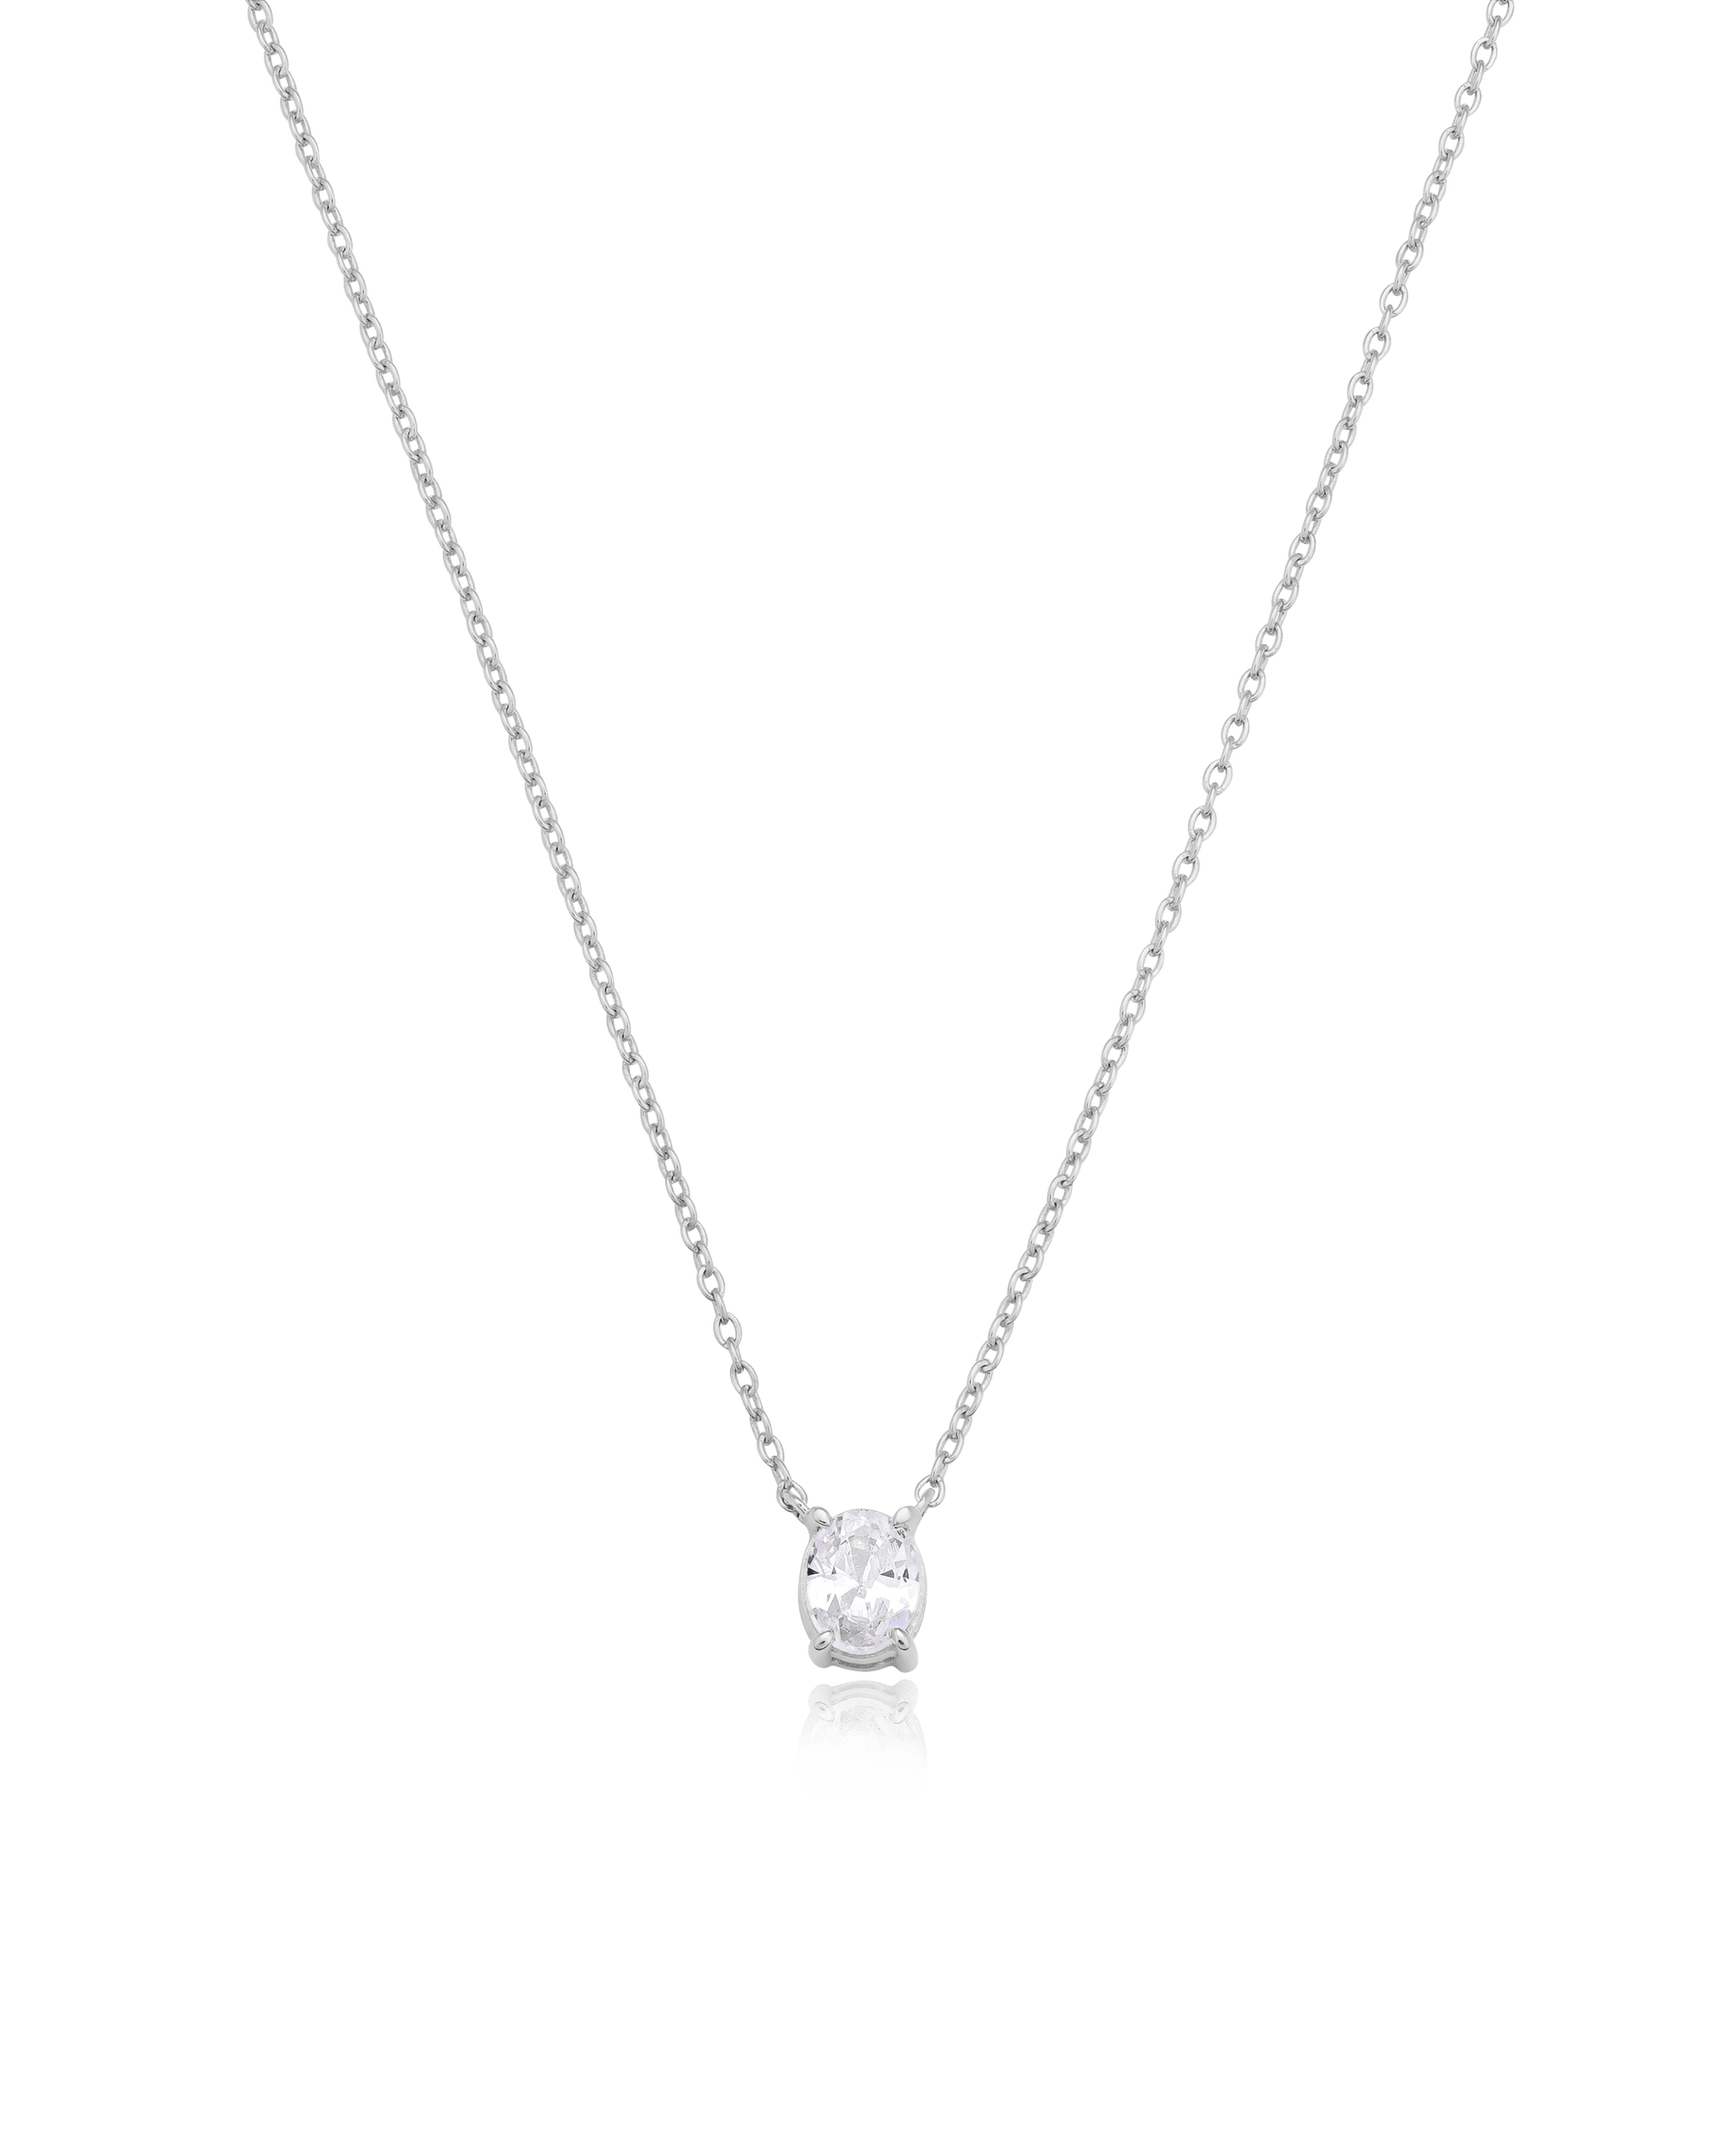 Oval Solitaire Diamond Necklace - 14K Yellow Gold Necklaces magal-dev 